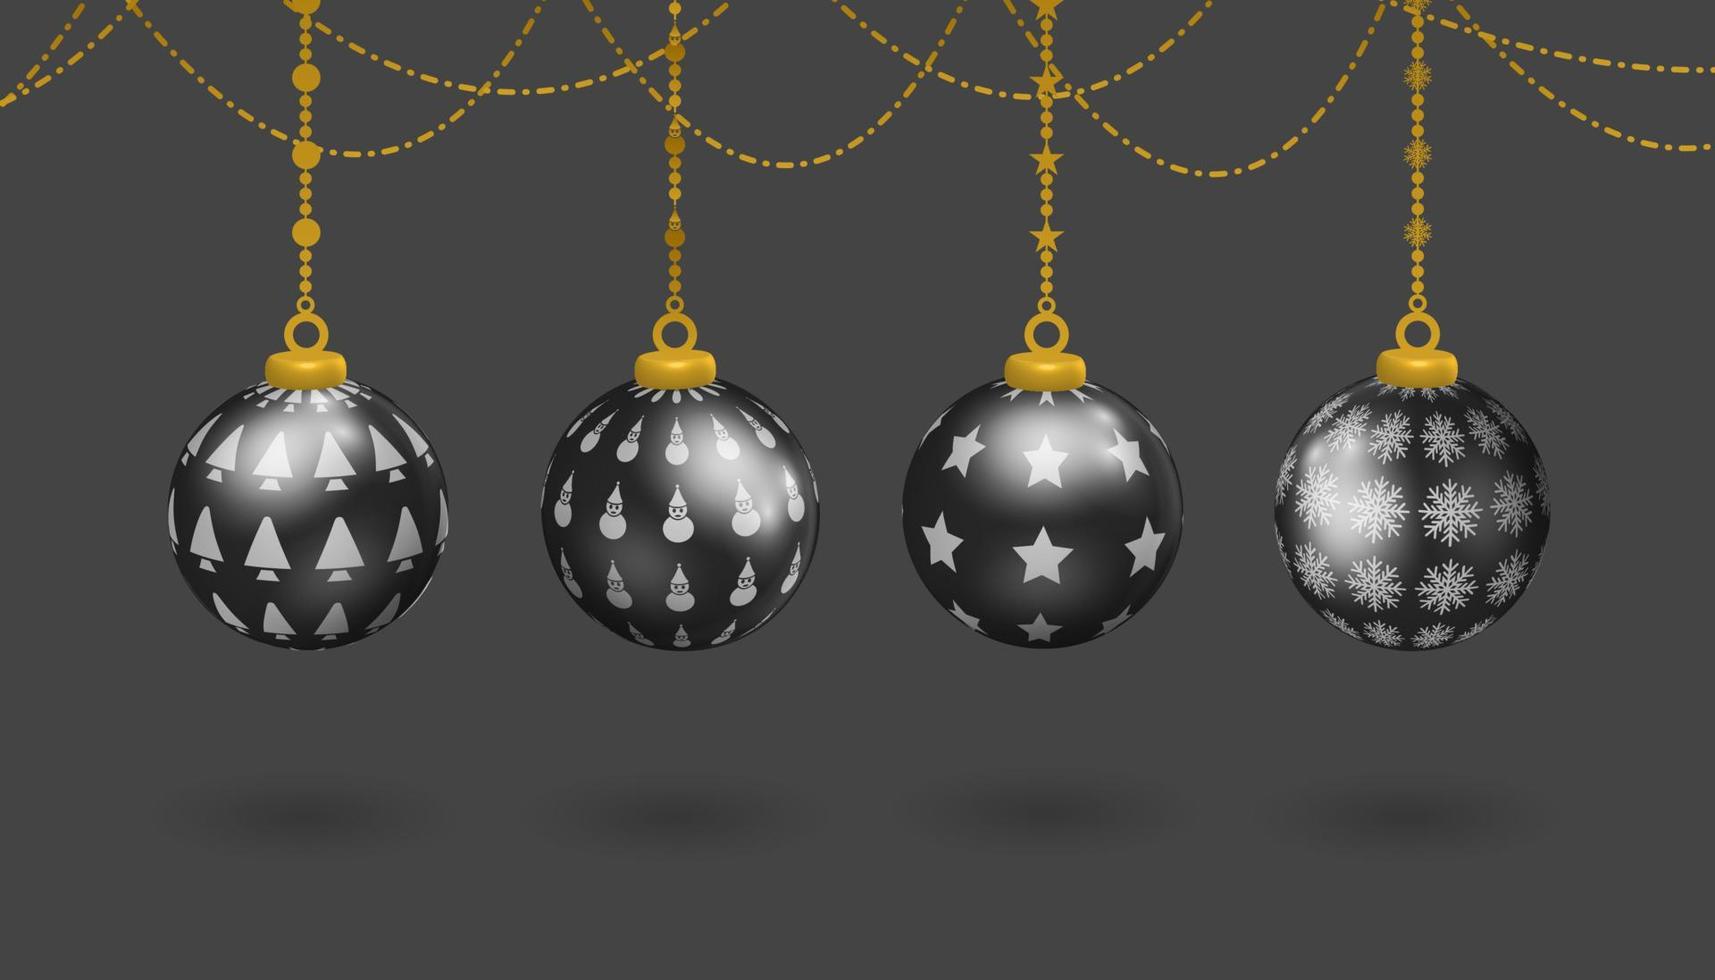 black hanging ball decoration set, with various symbol patterns, snowman, christmas tree, stars and snowflakes, christmas decorative realistic 3d vector